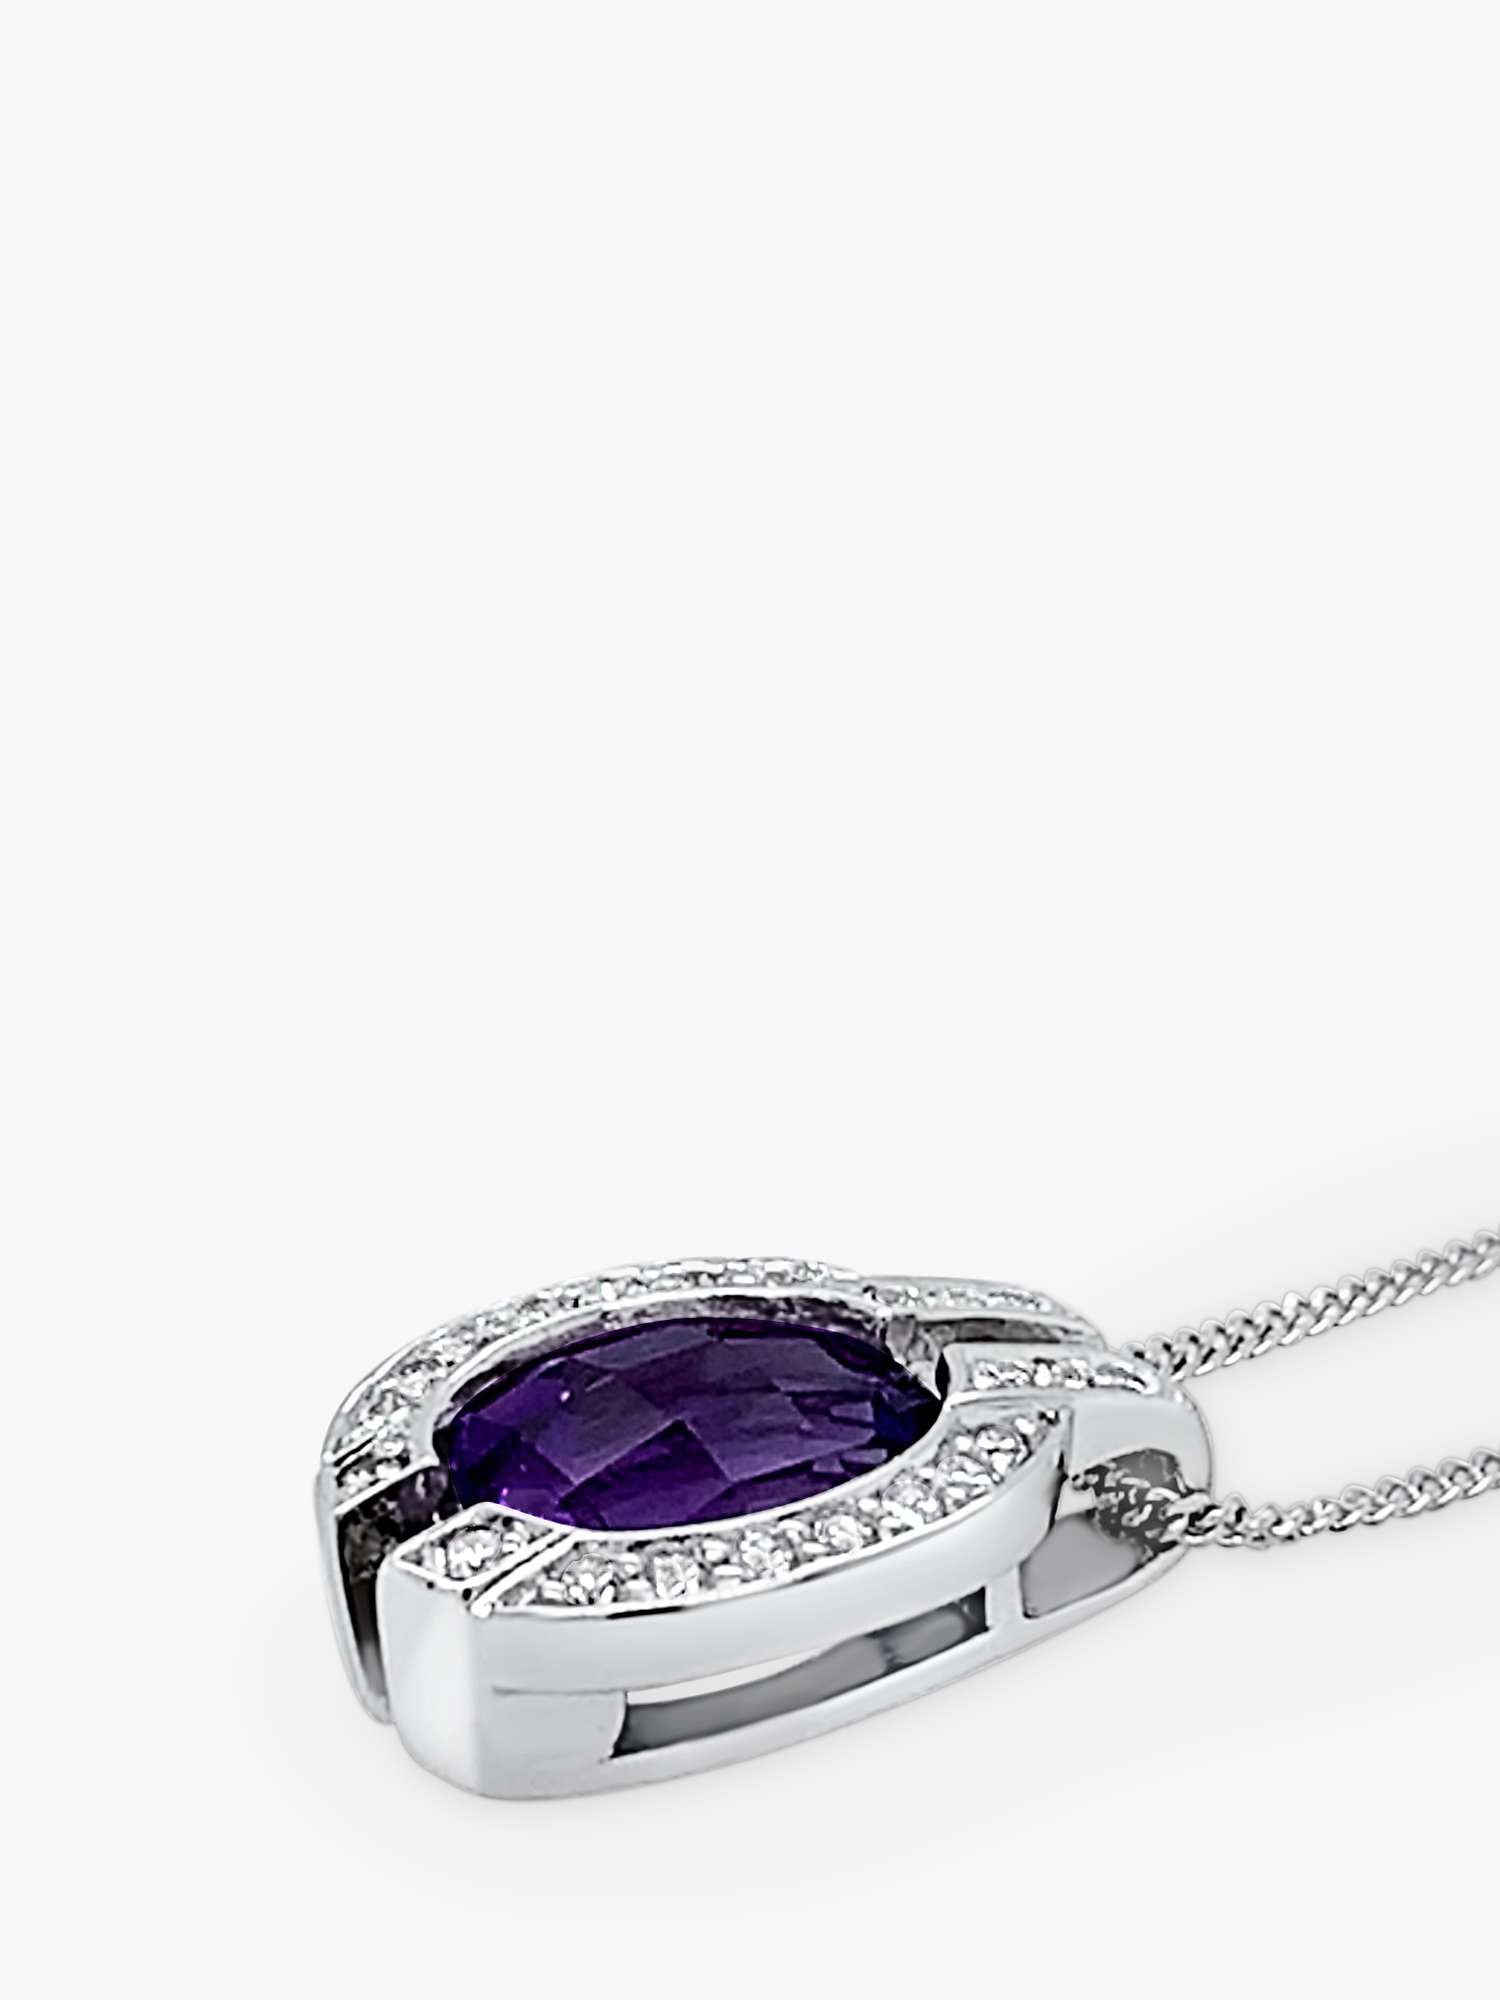 Buy Milton & Humble Jewellery 18ct White Gold Second Hand Amethyst Pendant Necklace Online at johnlewis.com